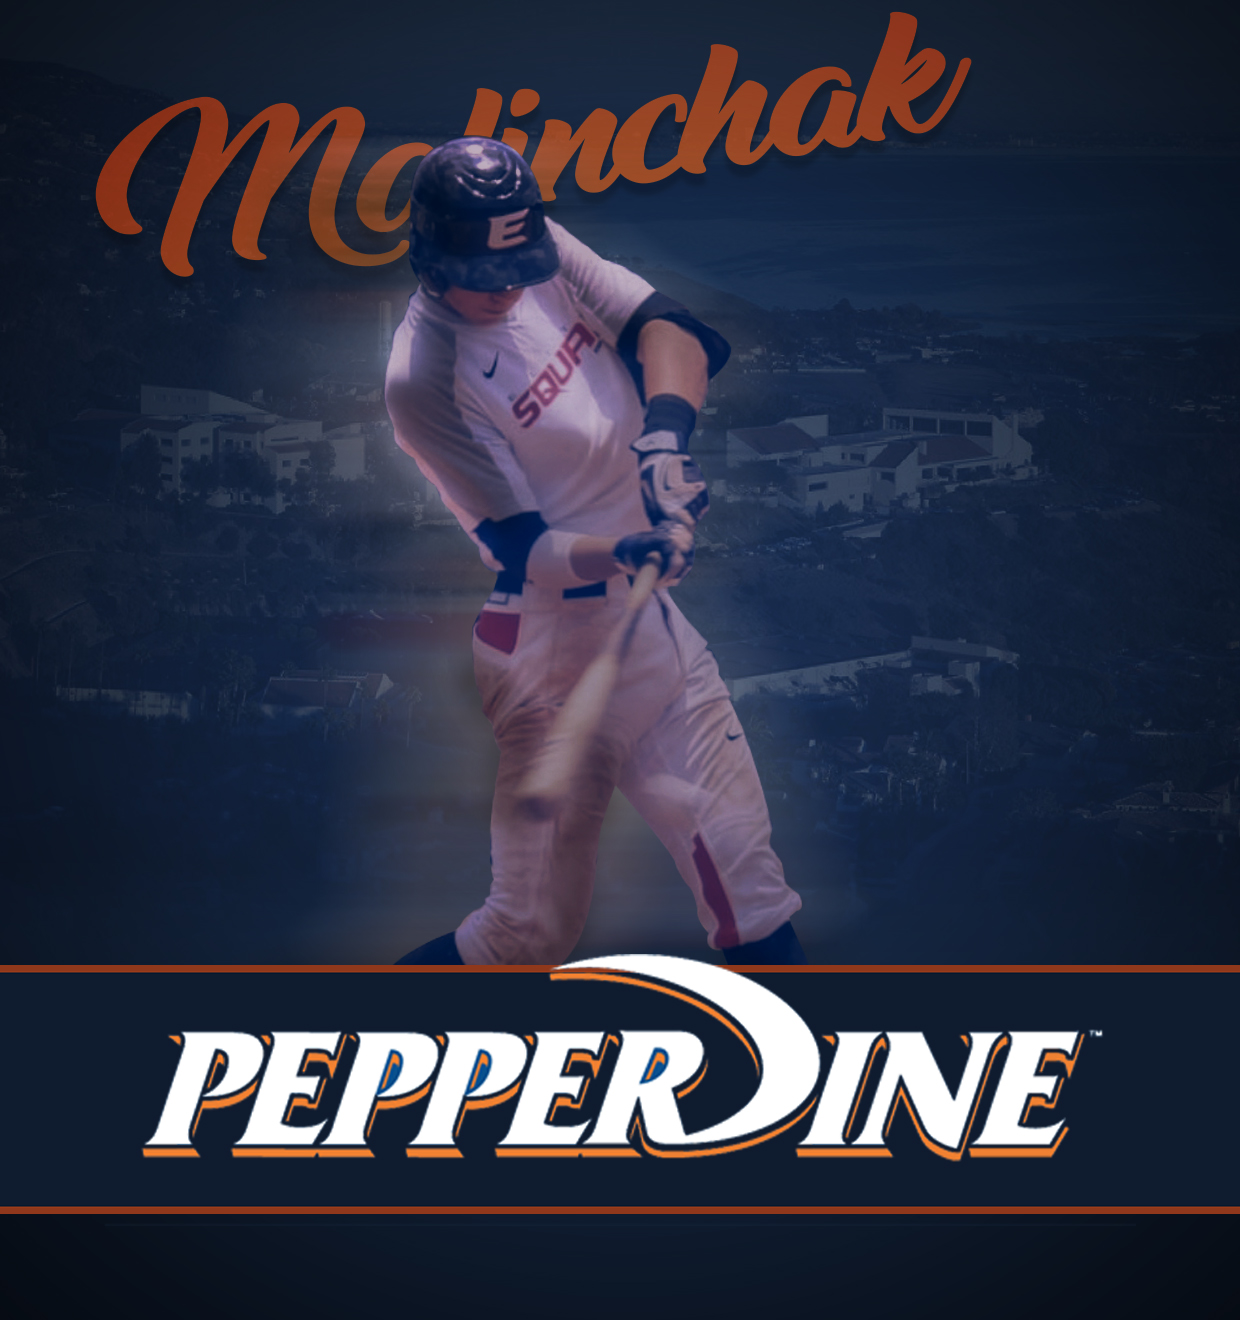 You are currently viewing Malinchak To Pepperdine!